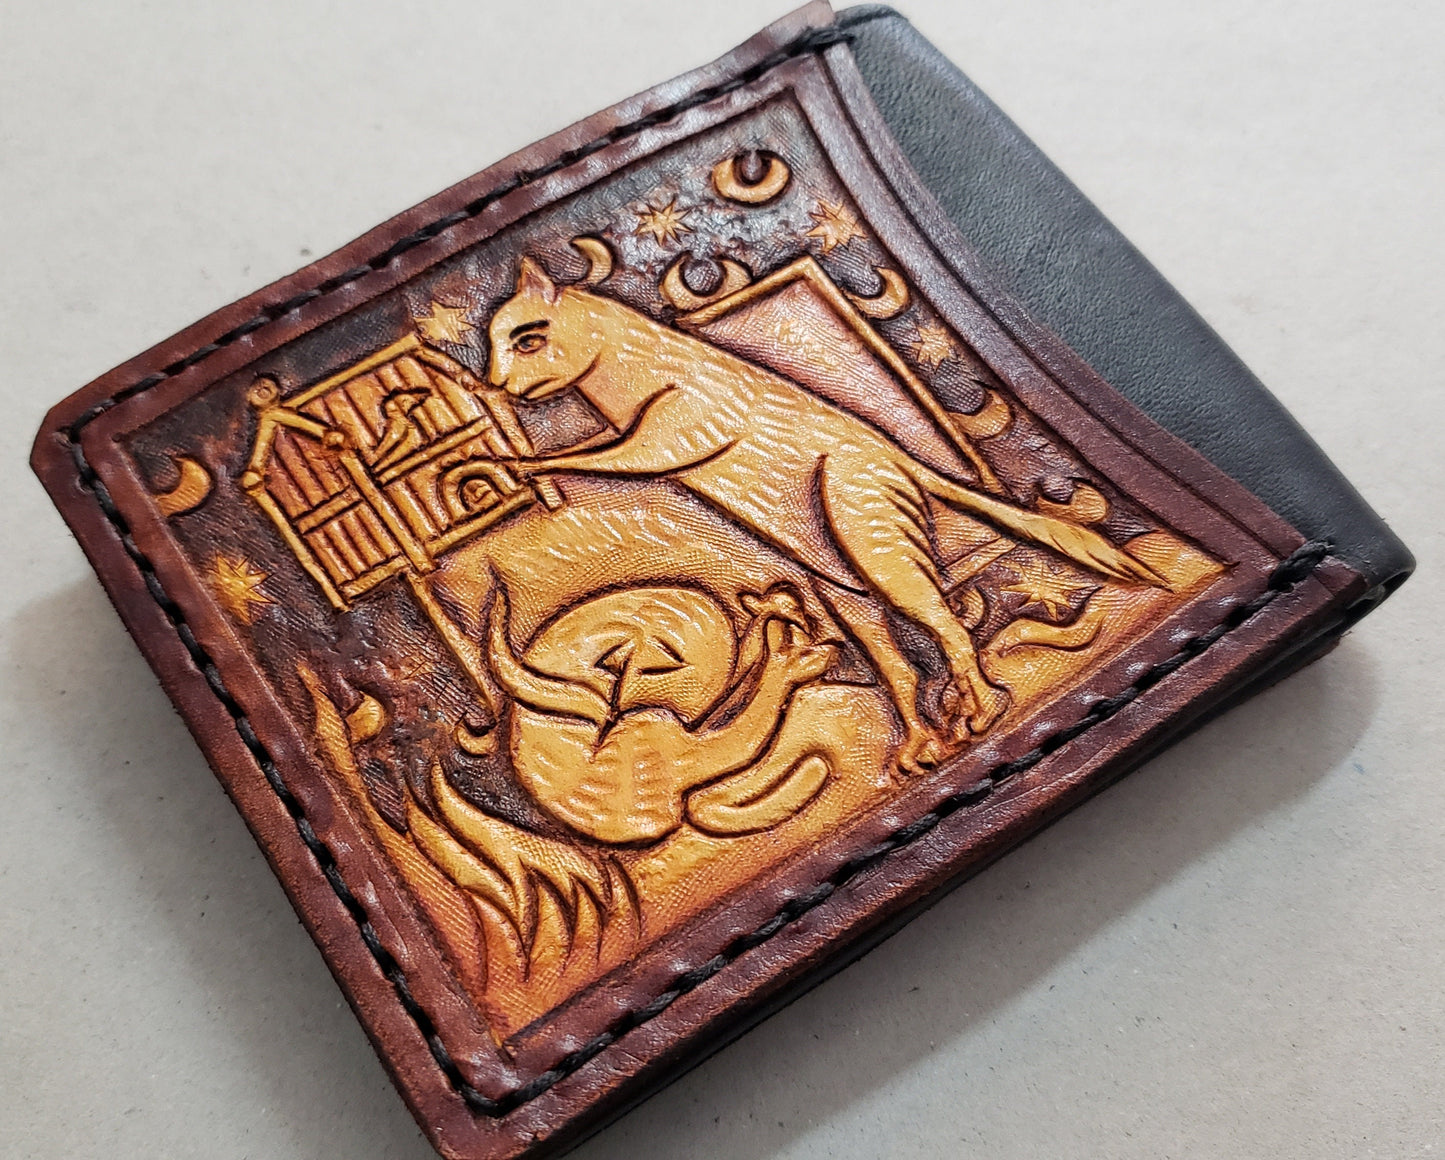 Marginalia medieval cats - leather wallet- Dark Brown and ivory colour - Leather Bifold Wallet - Handcrafted